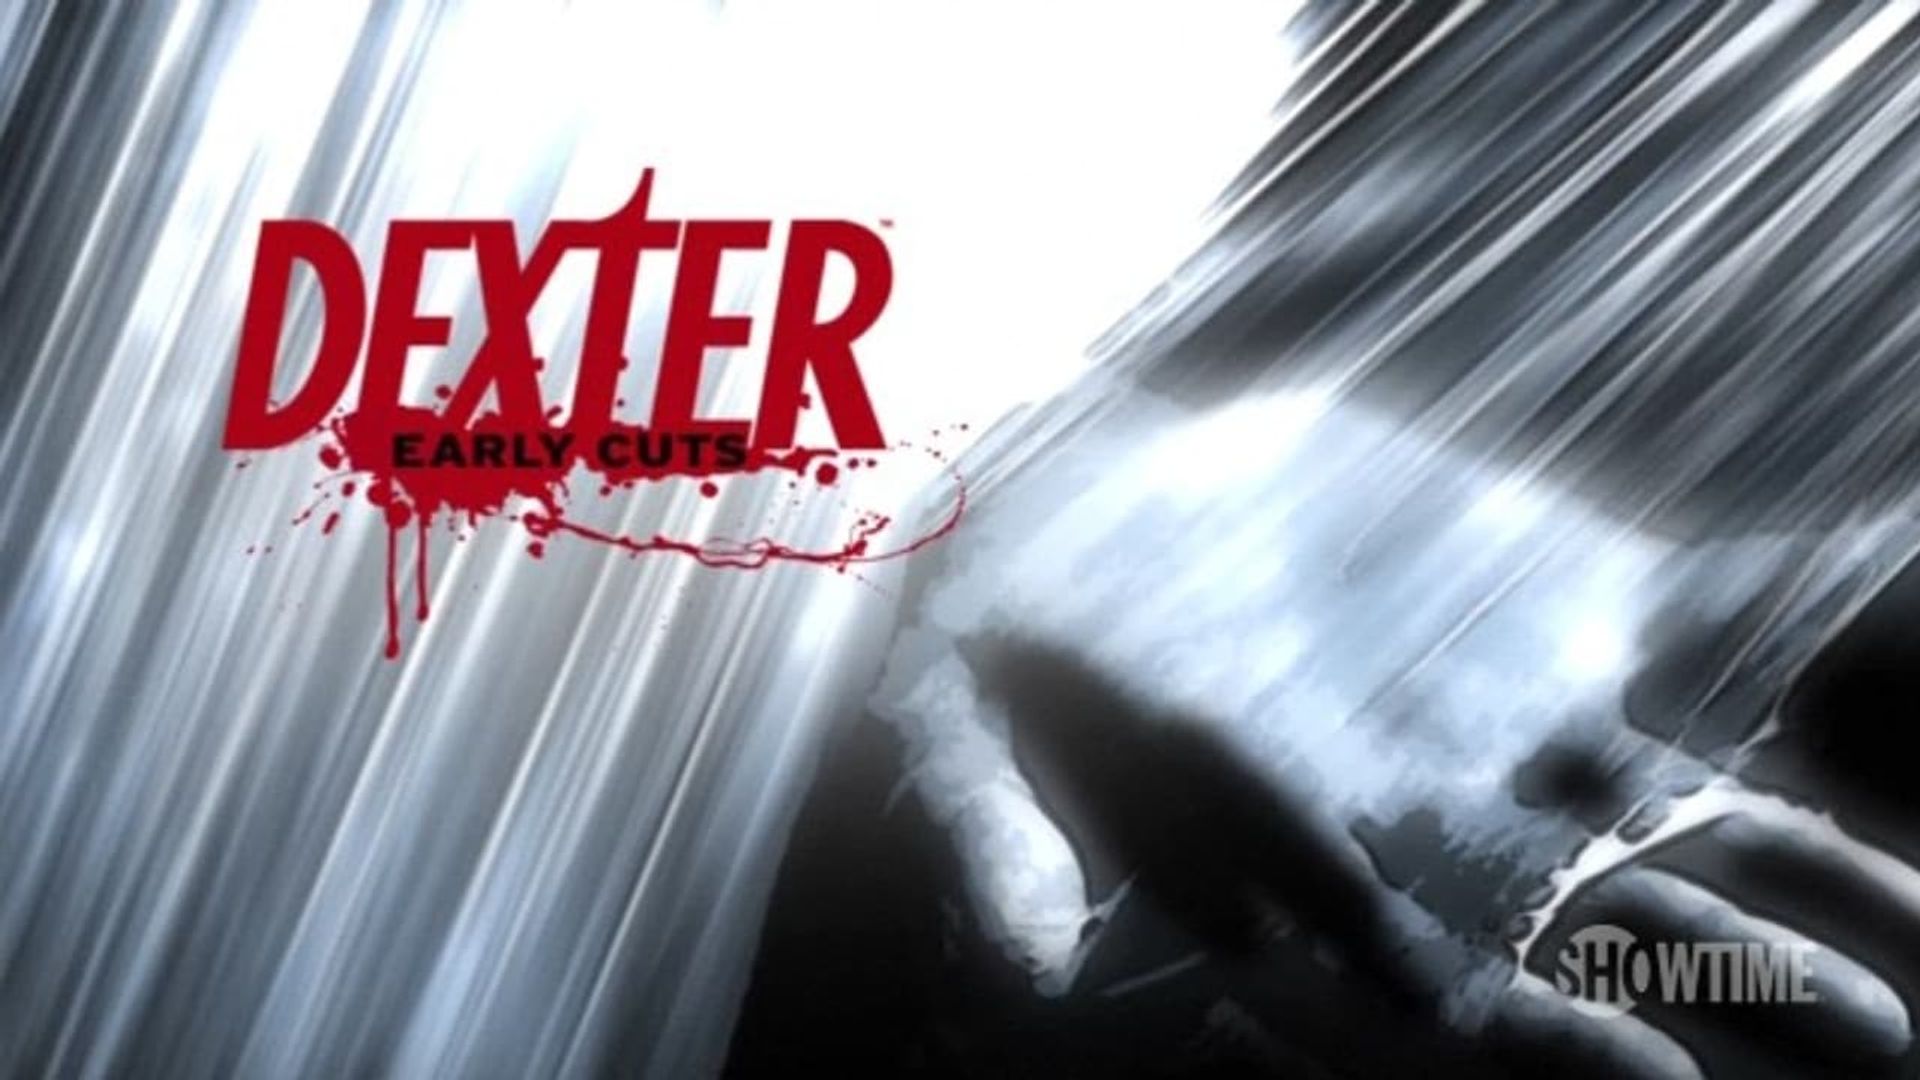 Dexter: Early Cuts background